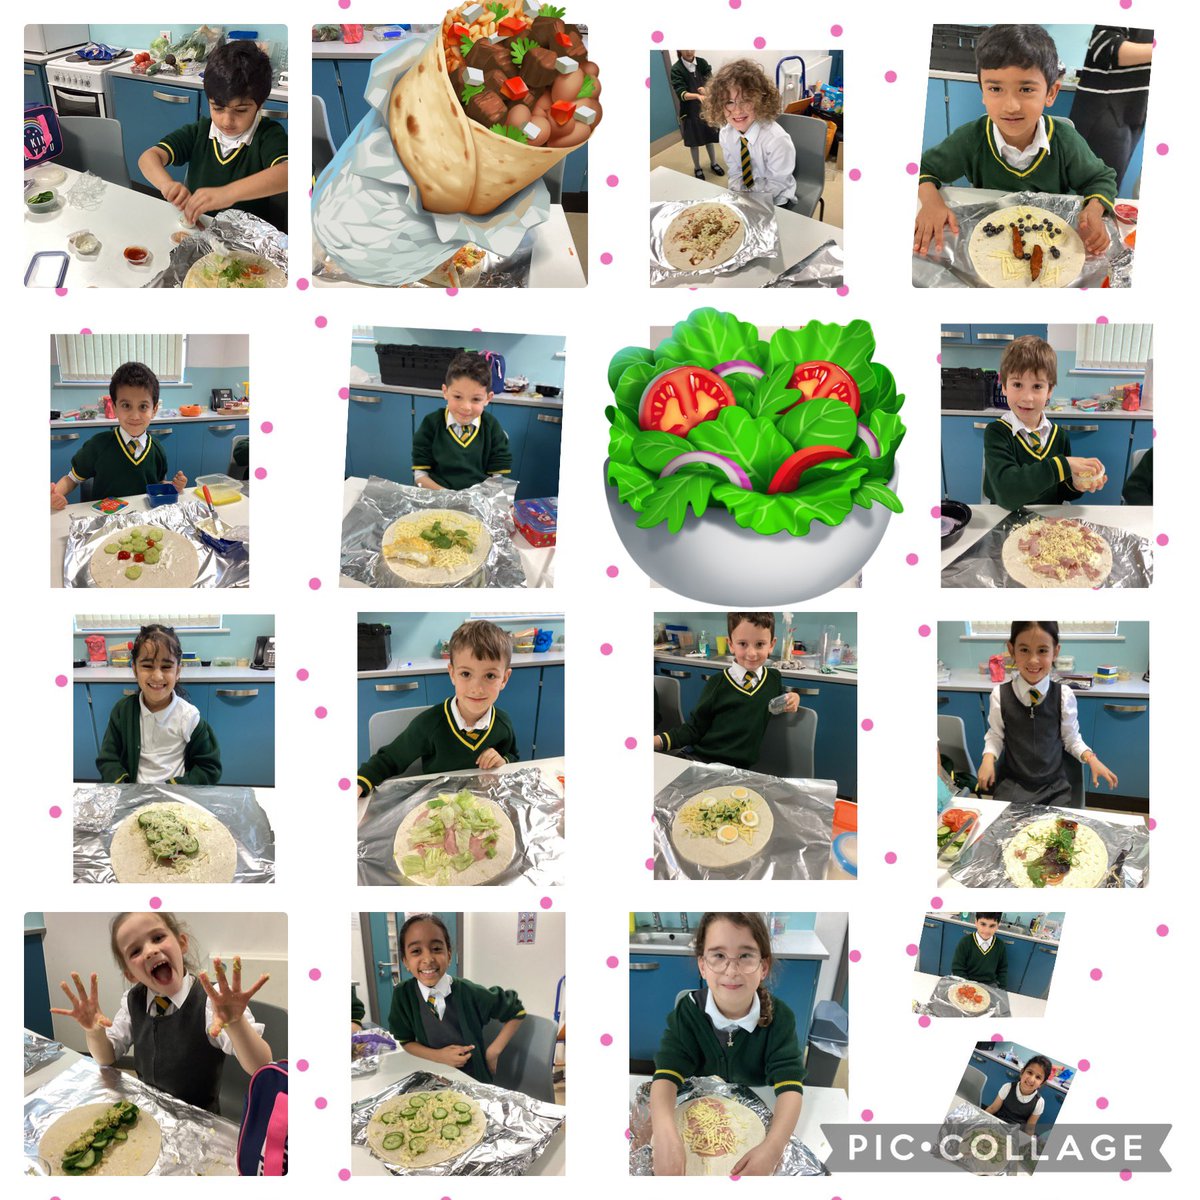 What a fun day we have had making and tasting healthy wraps in DT. @kapowprimary #WeAreBrightFutures #DesignTechnology #HealthyEating